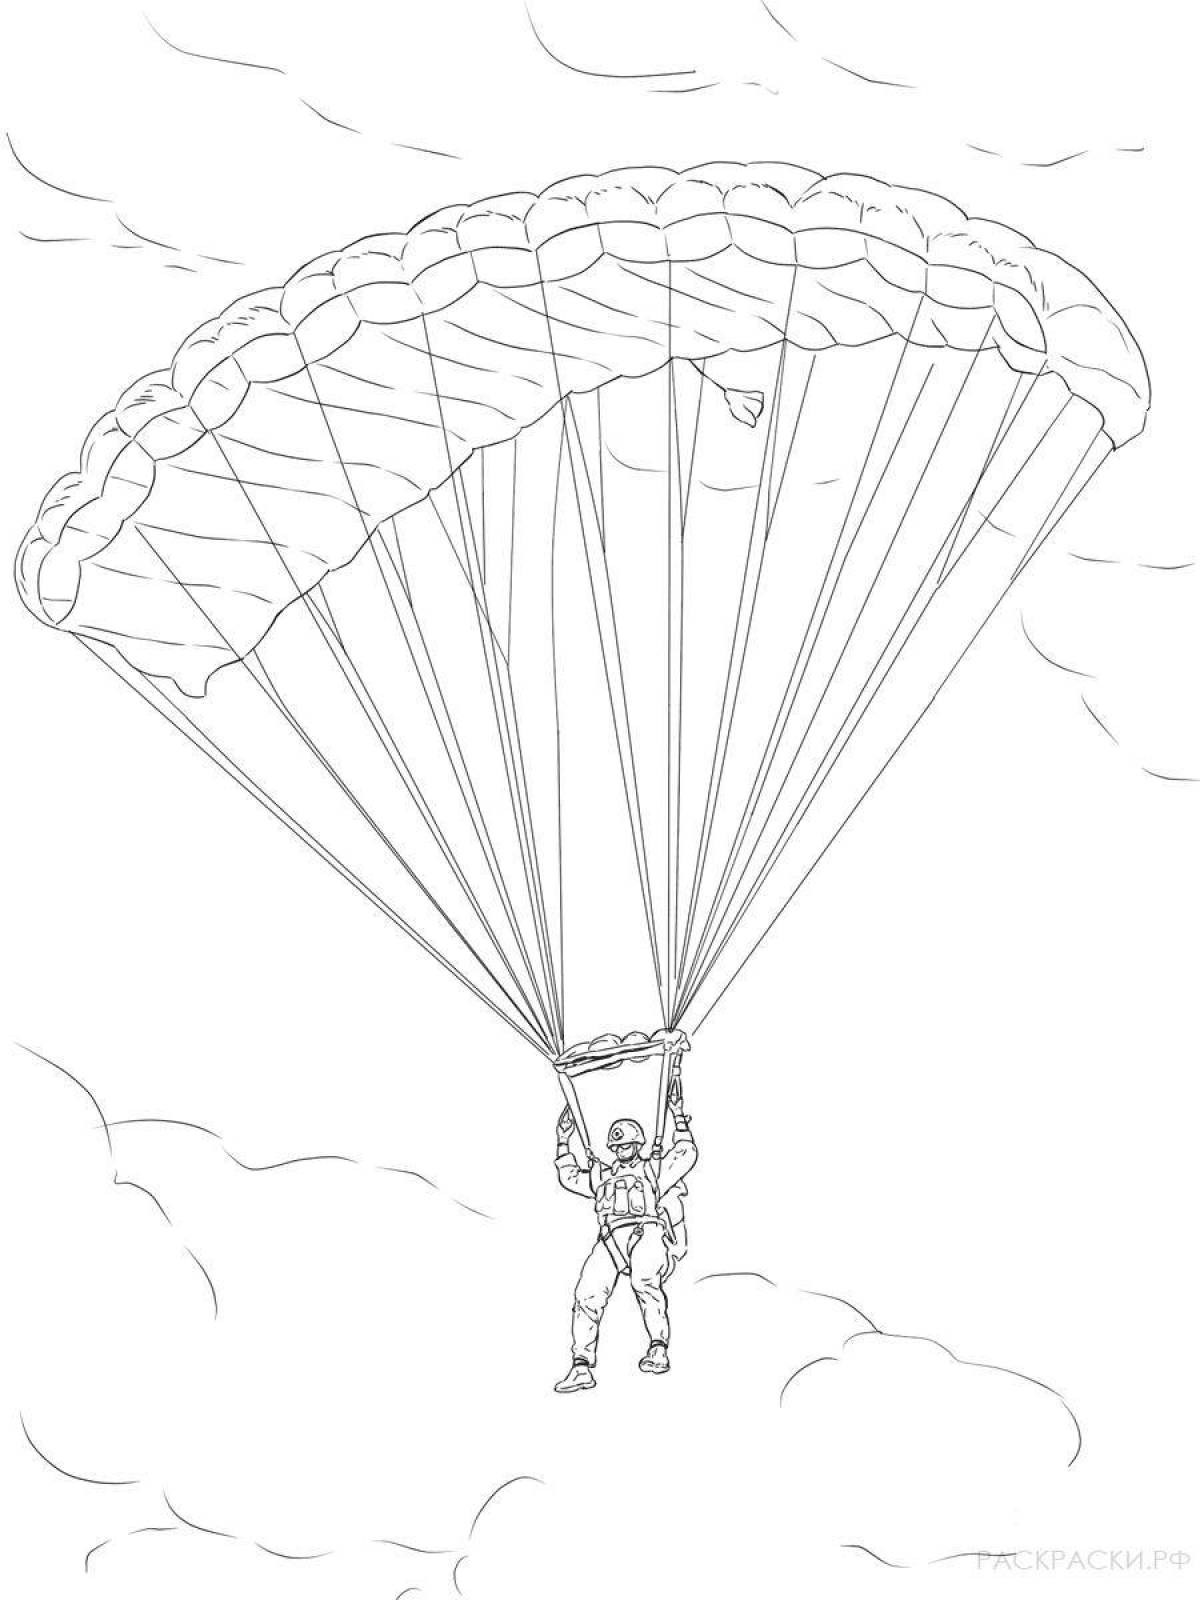 Playful paratrooper coloring page for kids